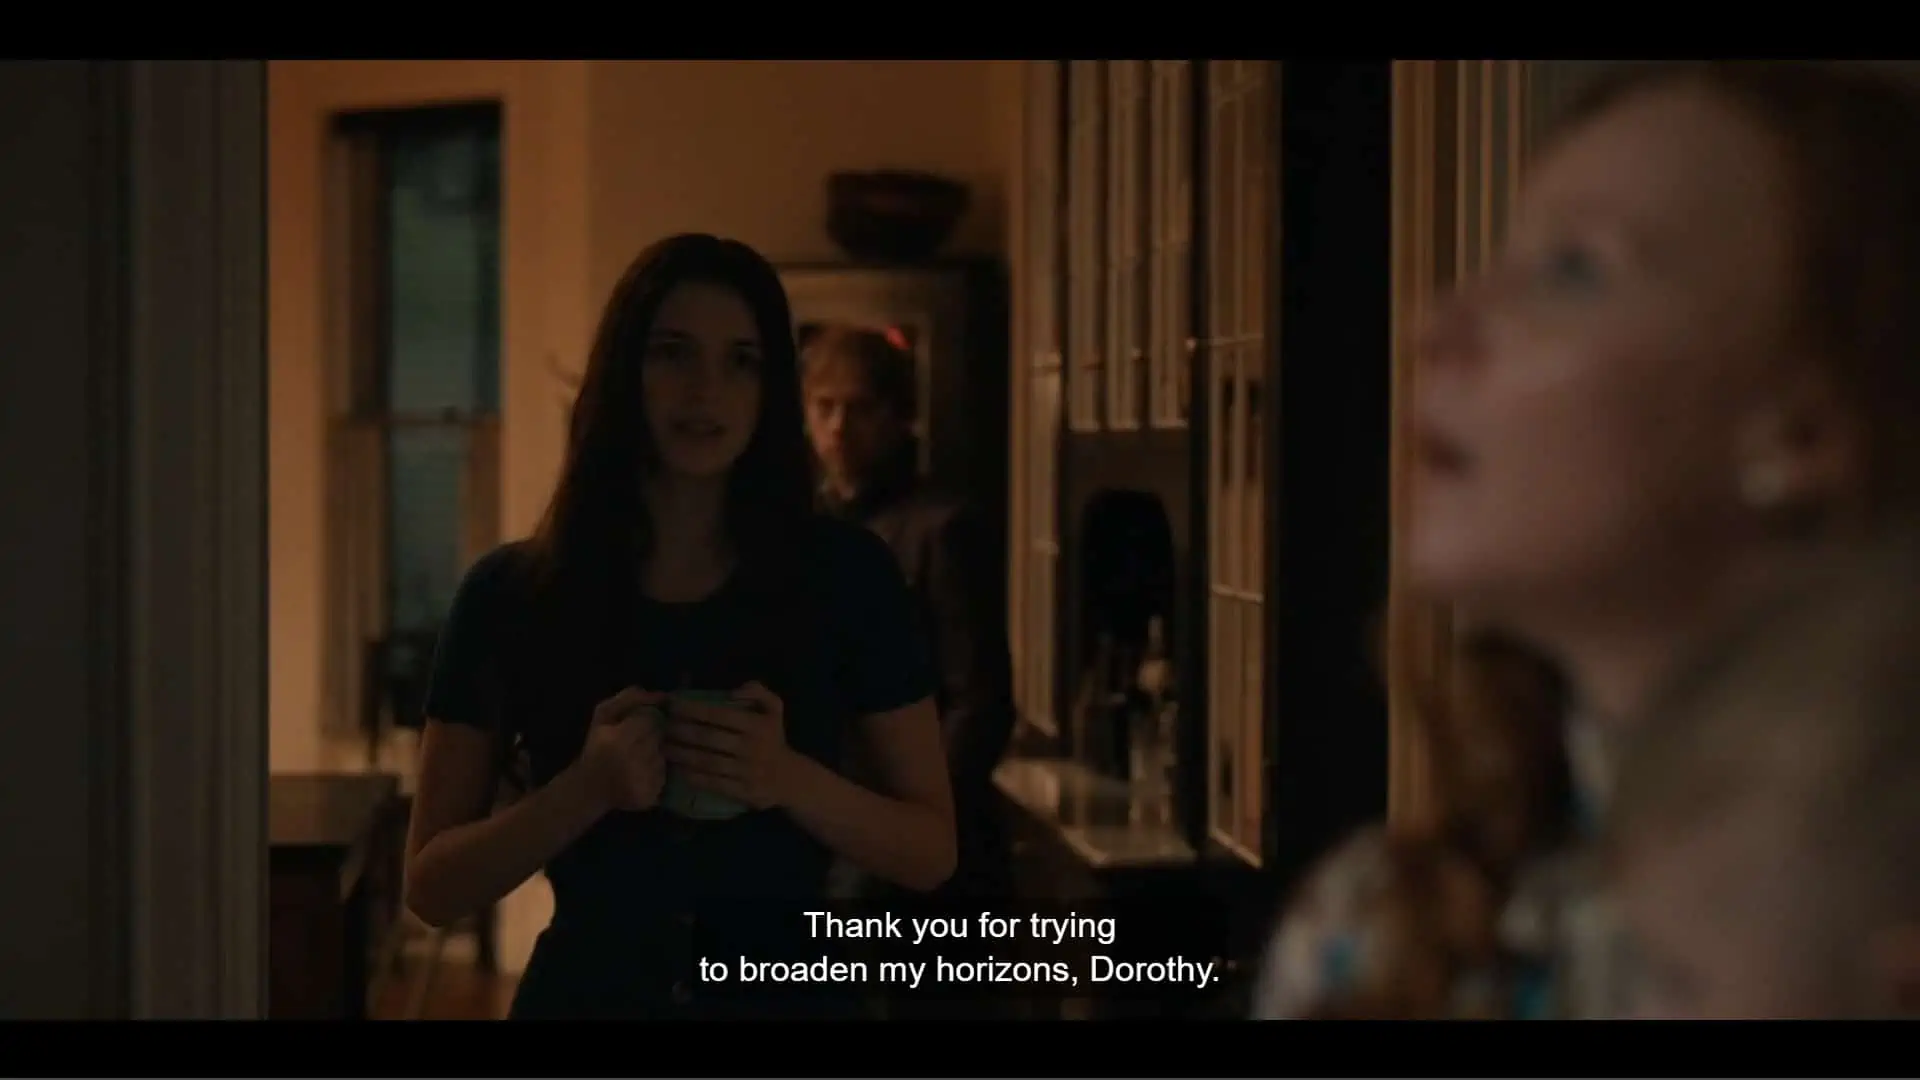 Leanne thanking Dorothy for her offering to get her into a dance program